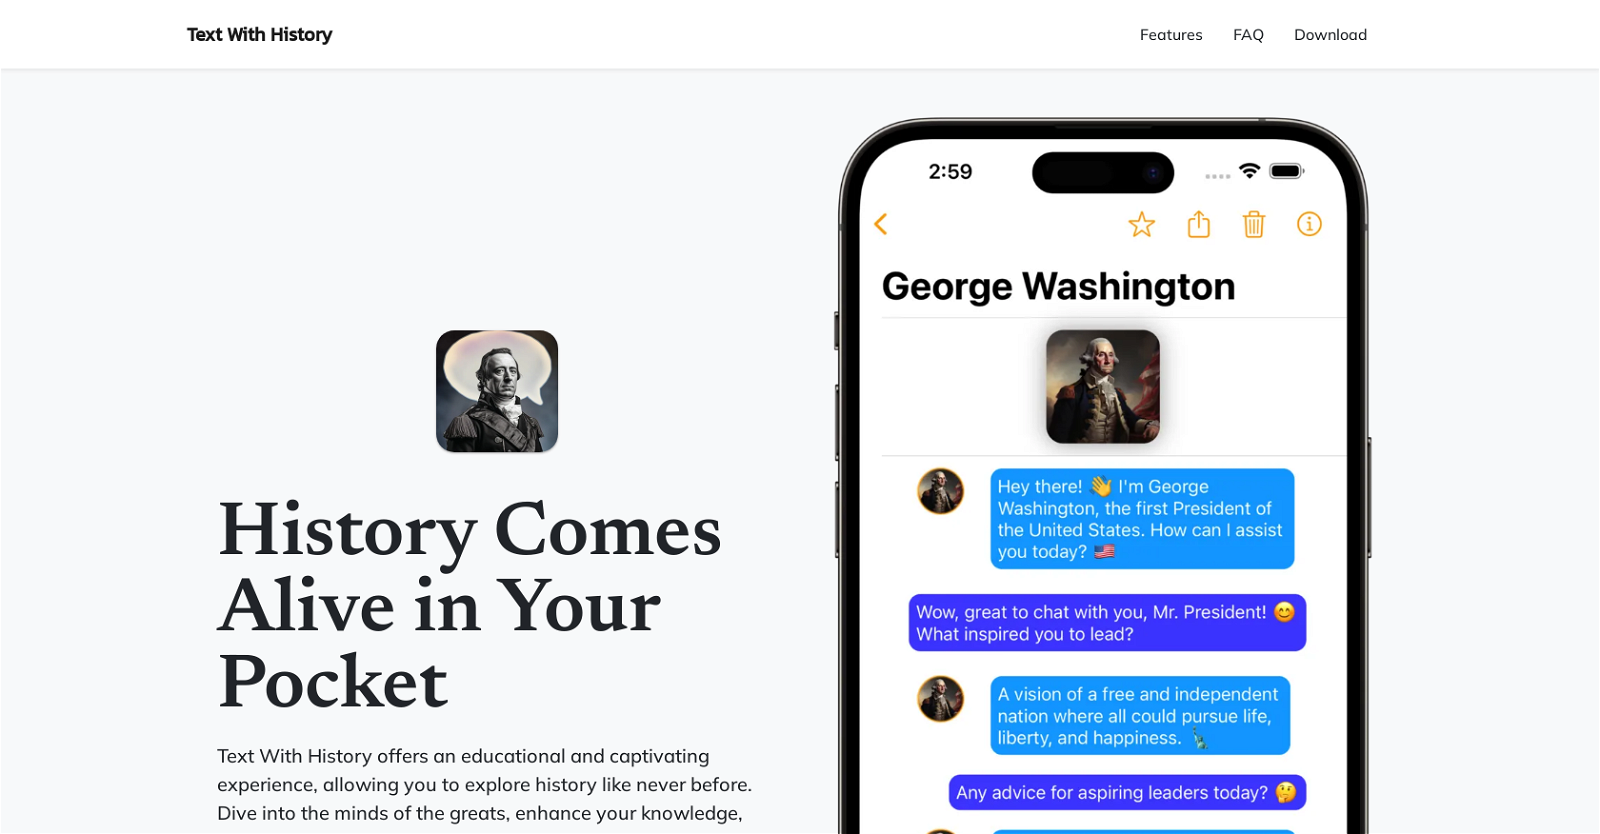 Text With History website